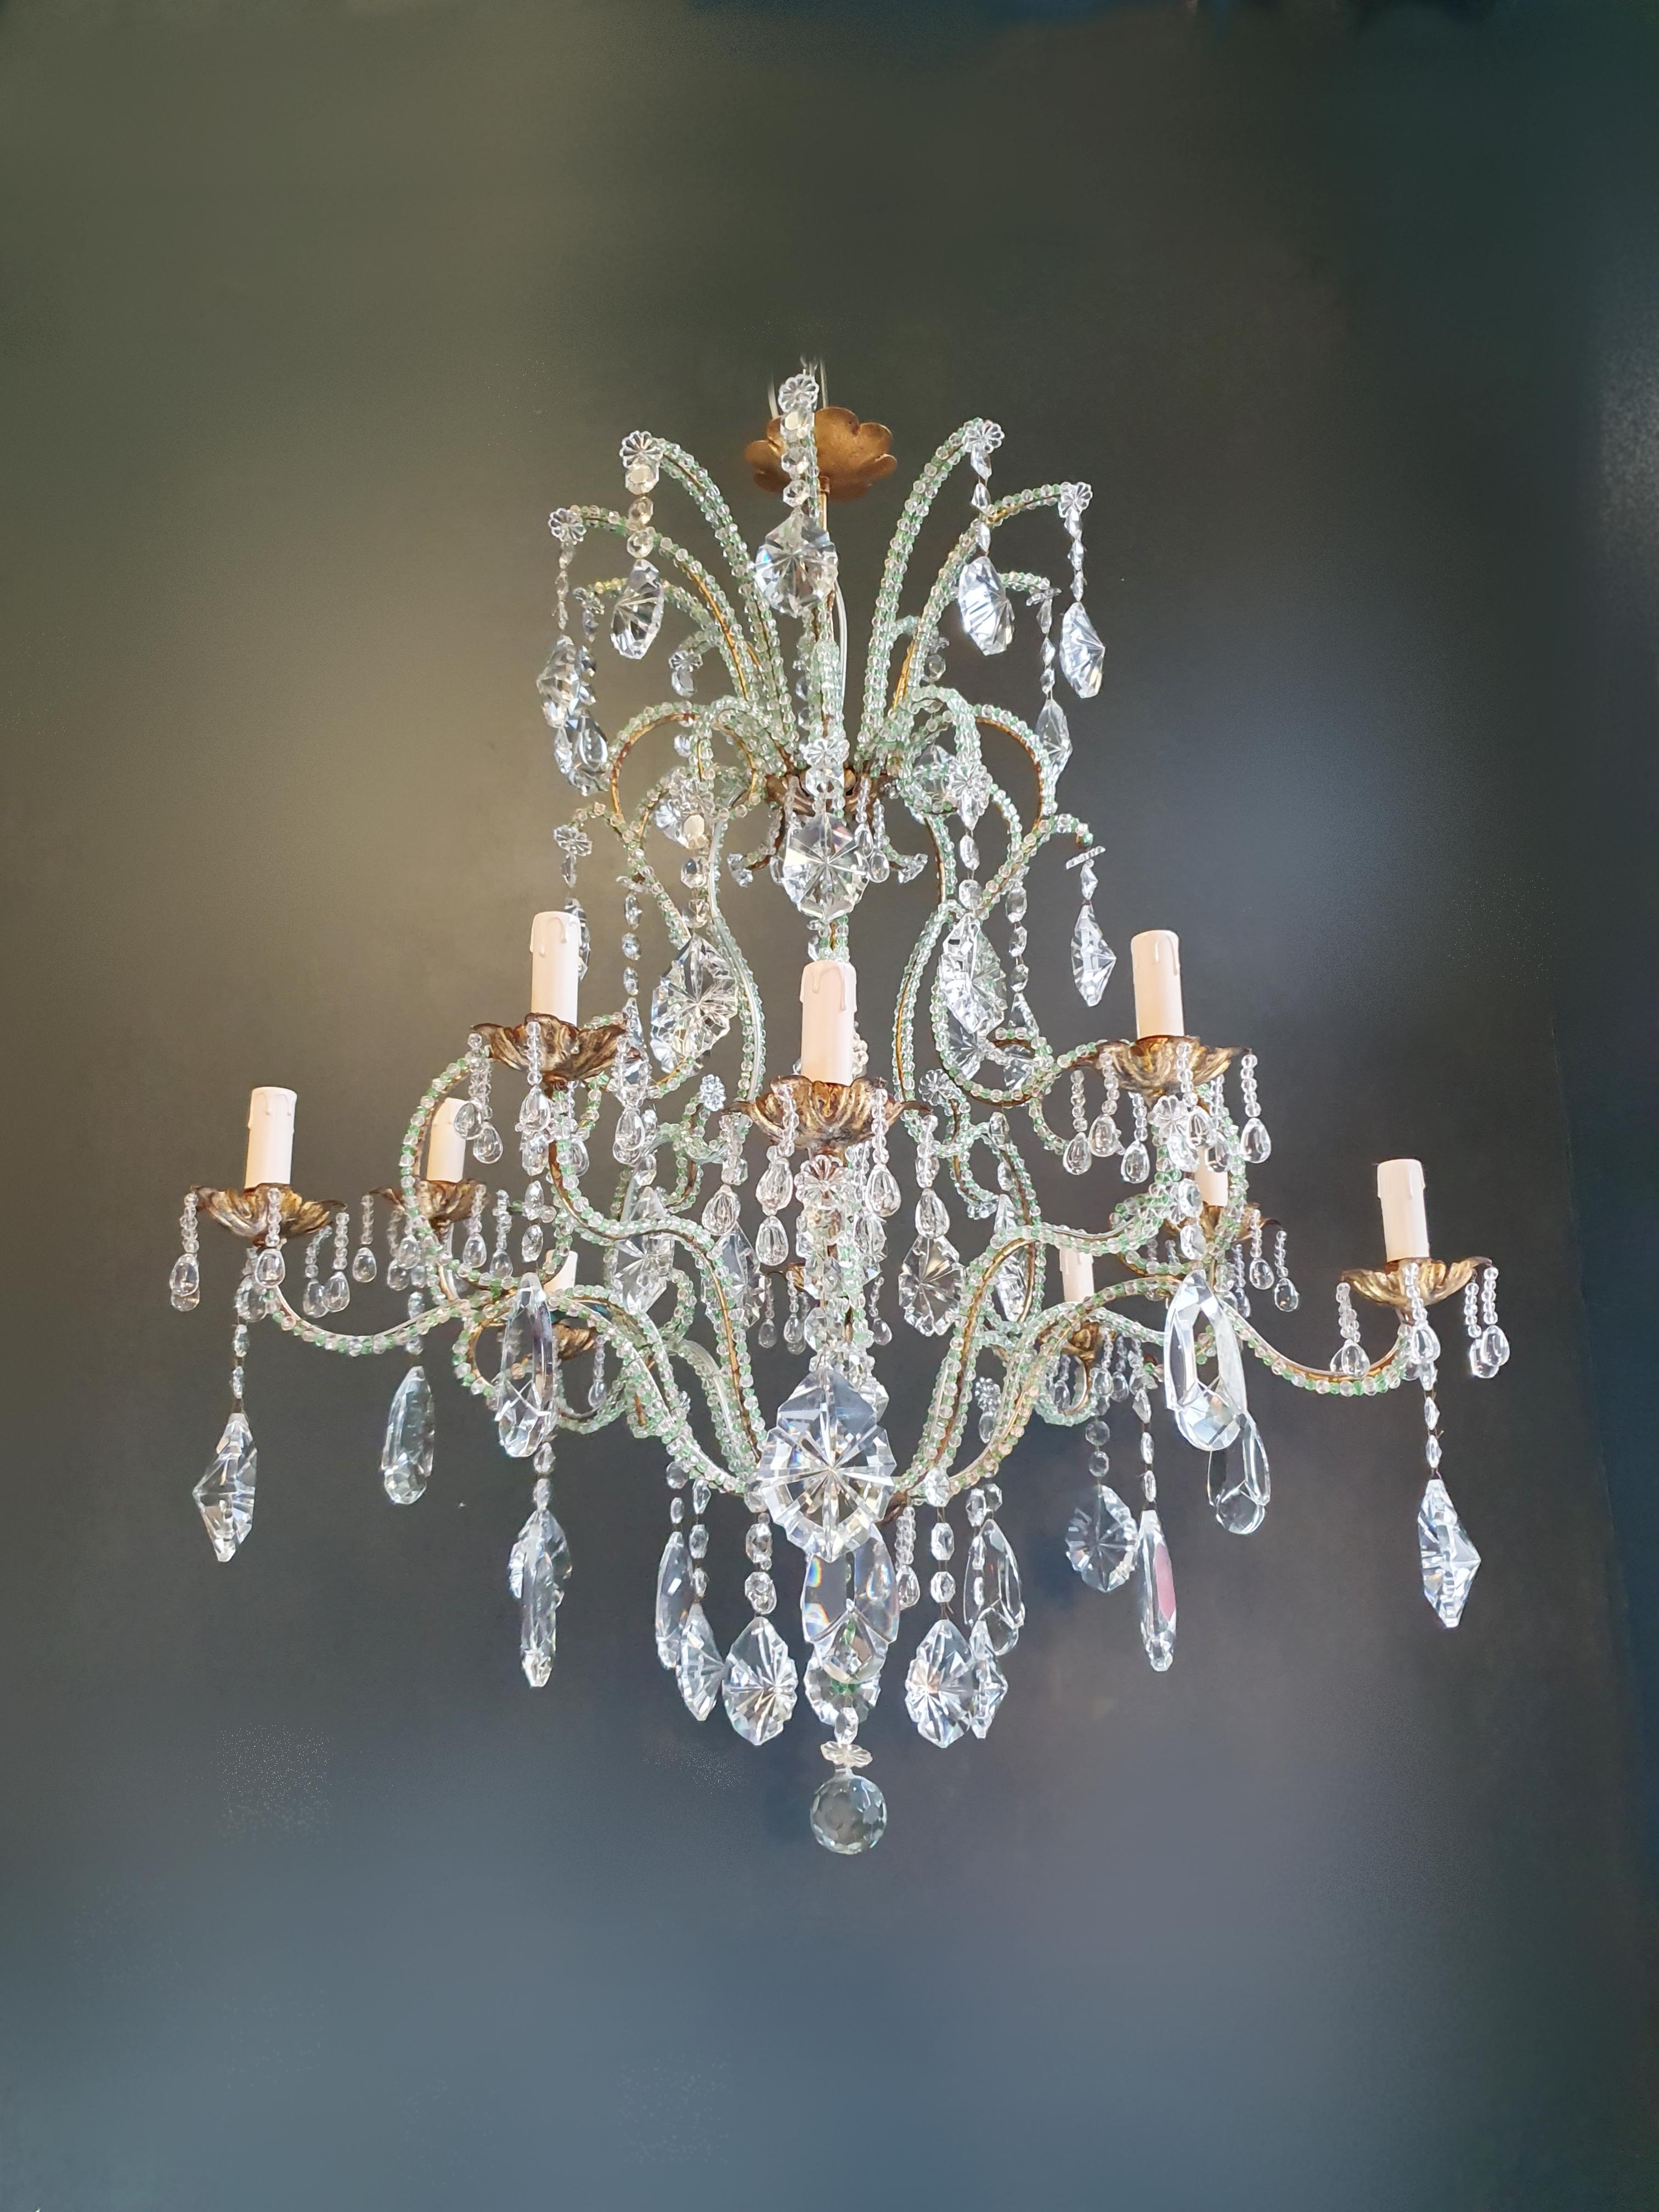 Mid-20th Century Beaded Green Crystal Chandelier Antique Ceiling Lamp Lustre Art Nouveau Brass